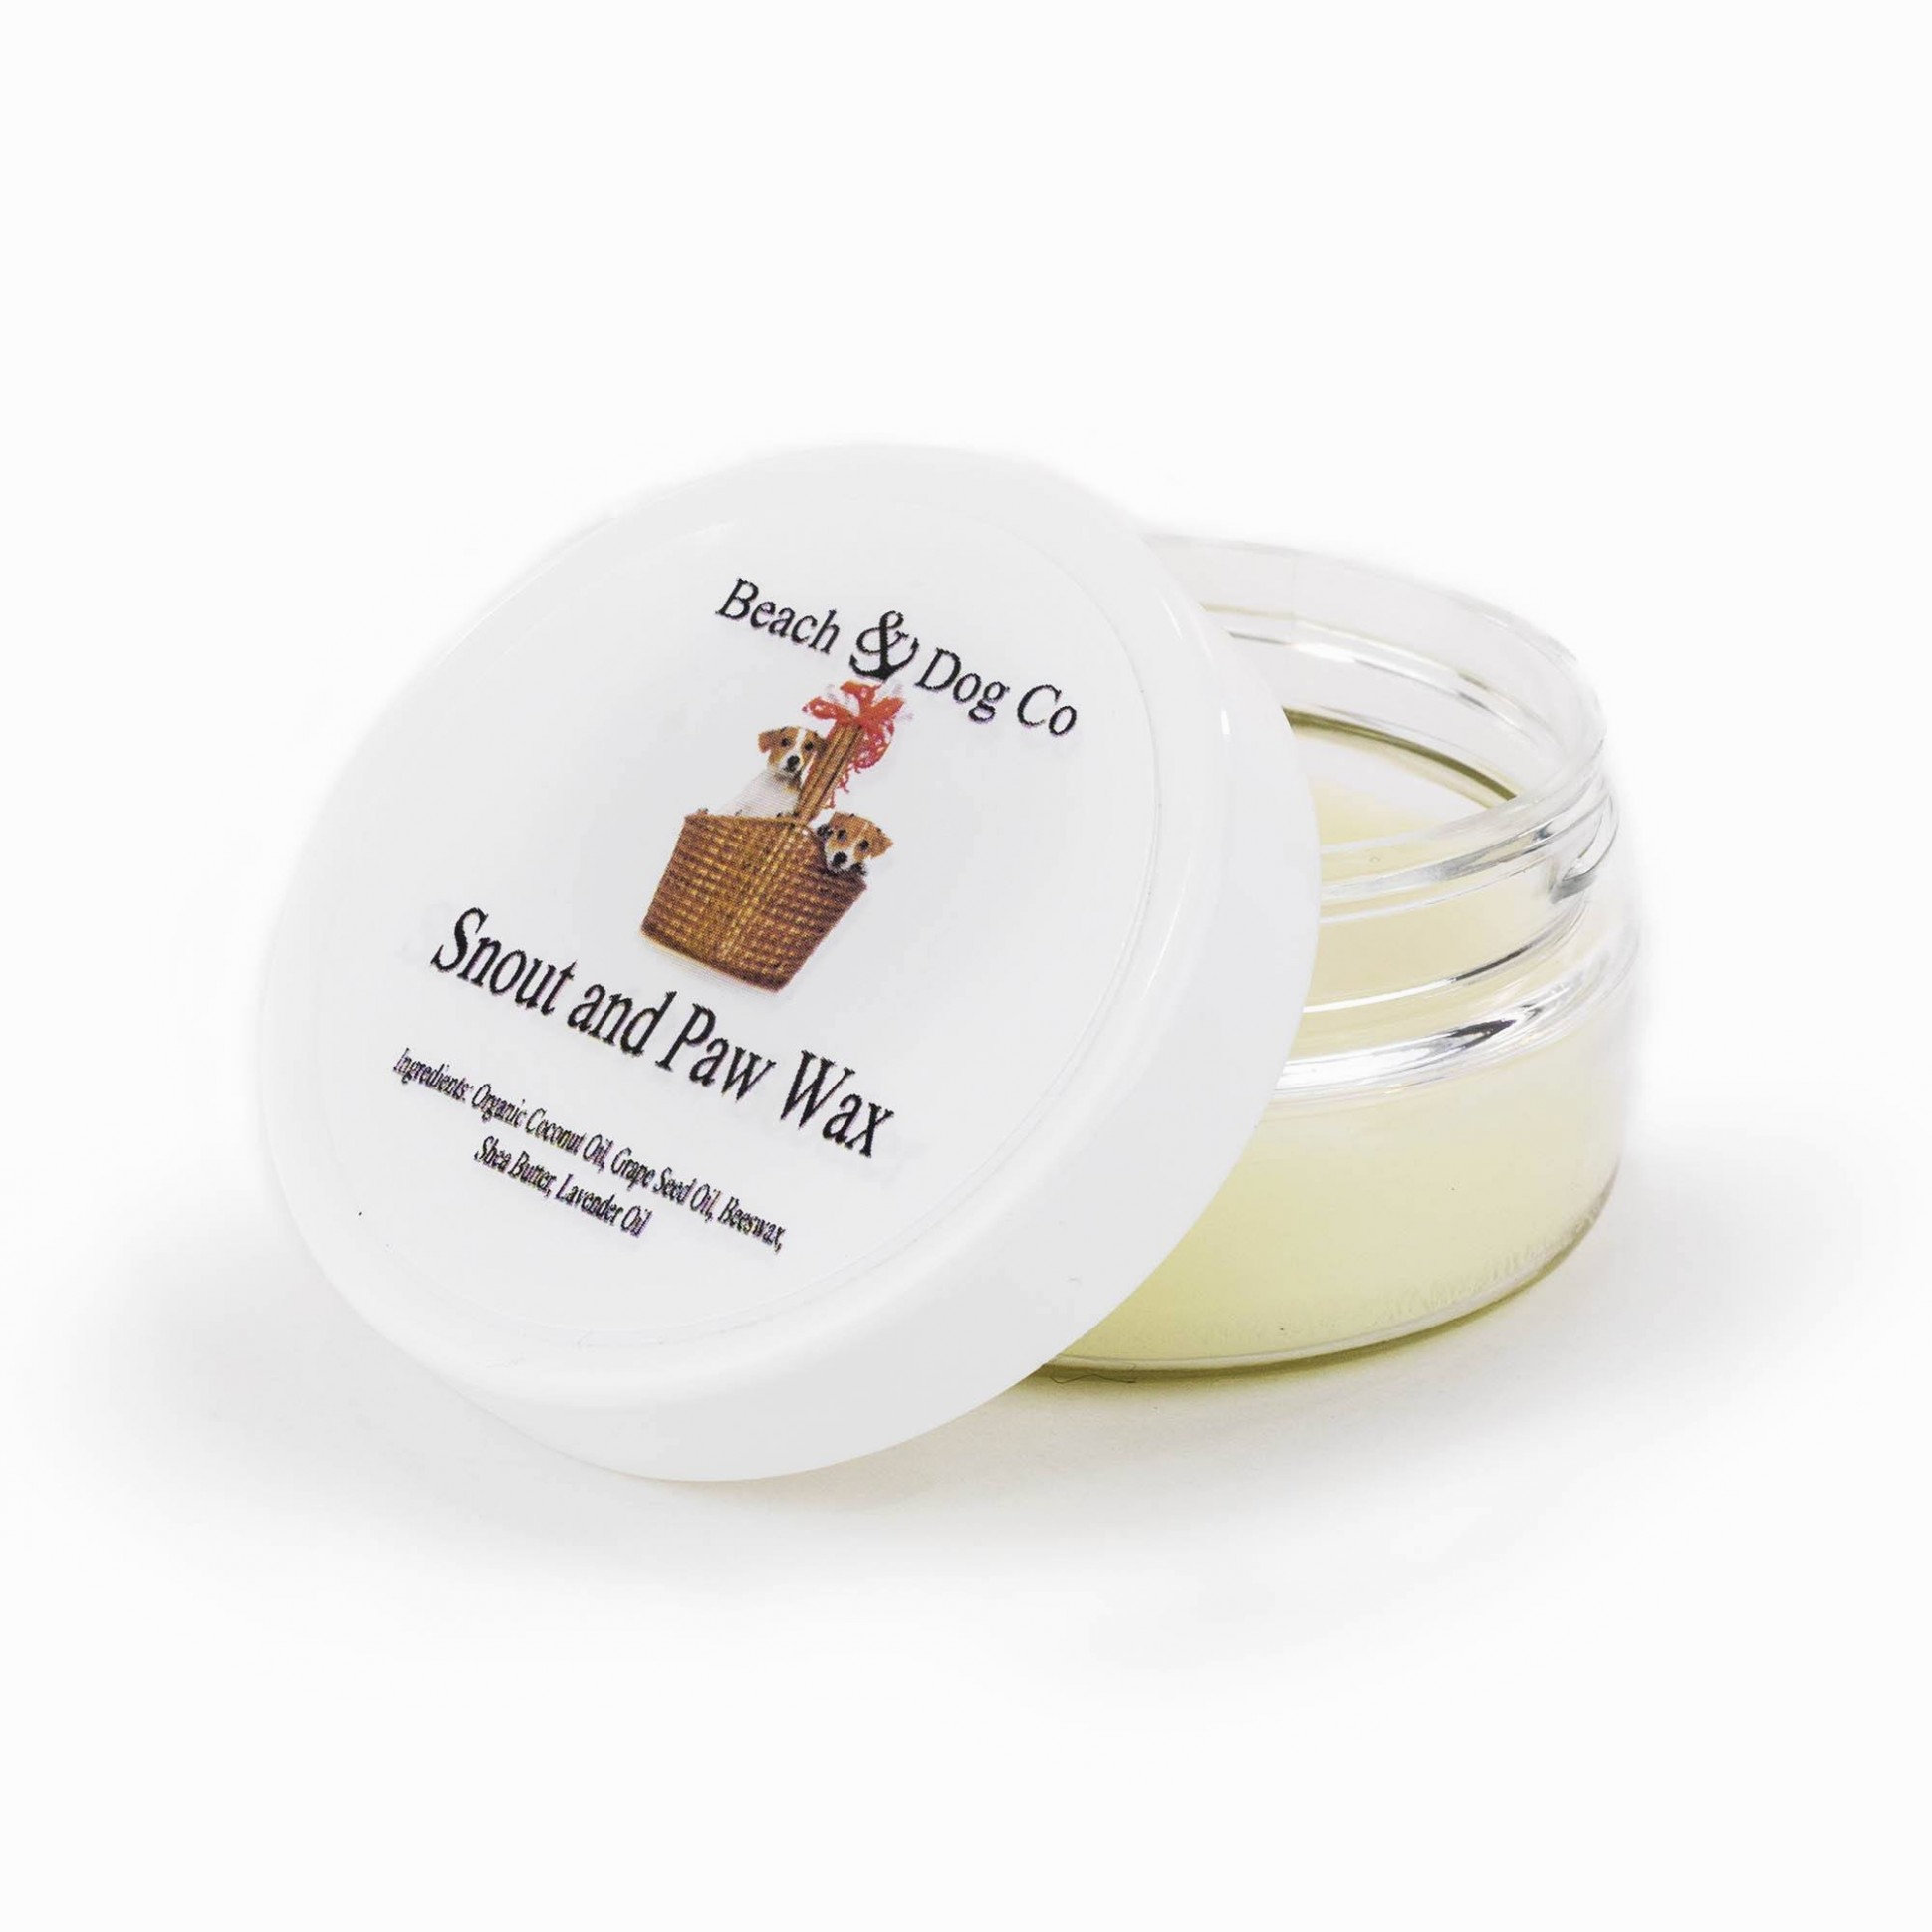 1517660597 Snout And Paw Wax 12 Oz For Dry Chapped Cracked Noses And Paws.jpg